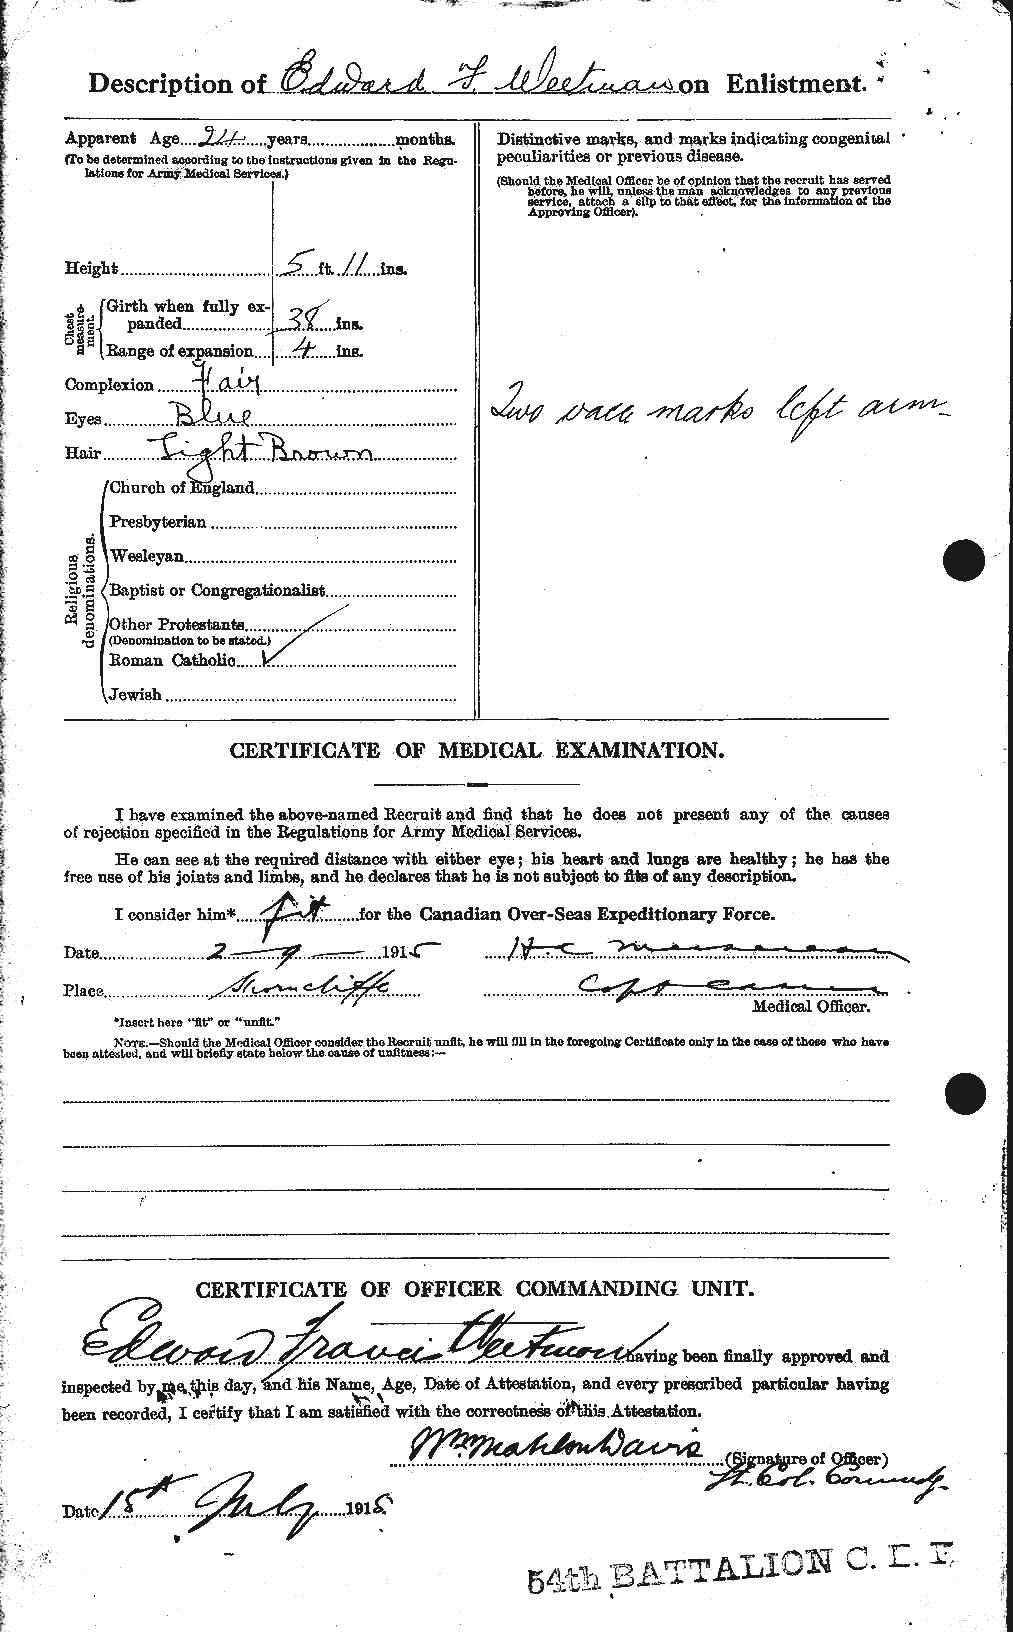 Personnel Records of the First World War - CEF 663568b